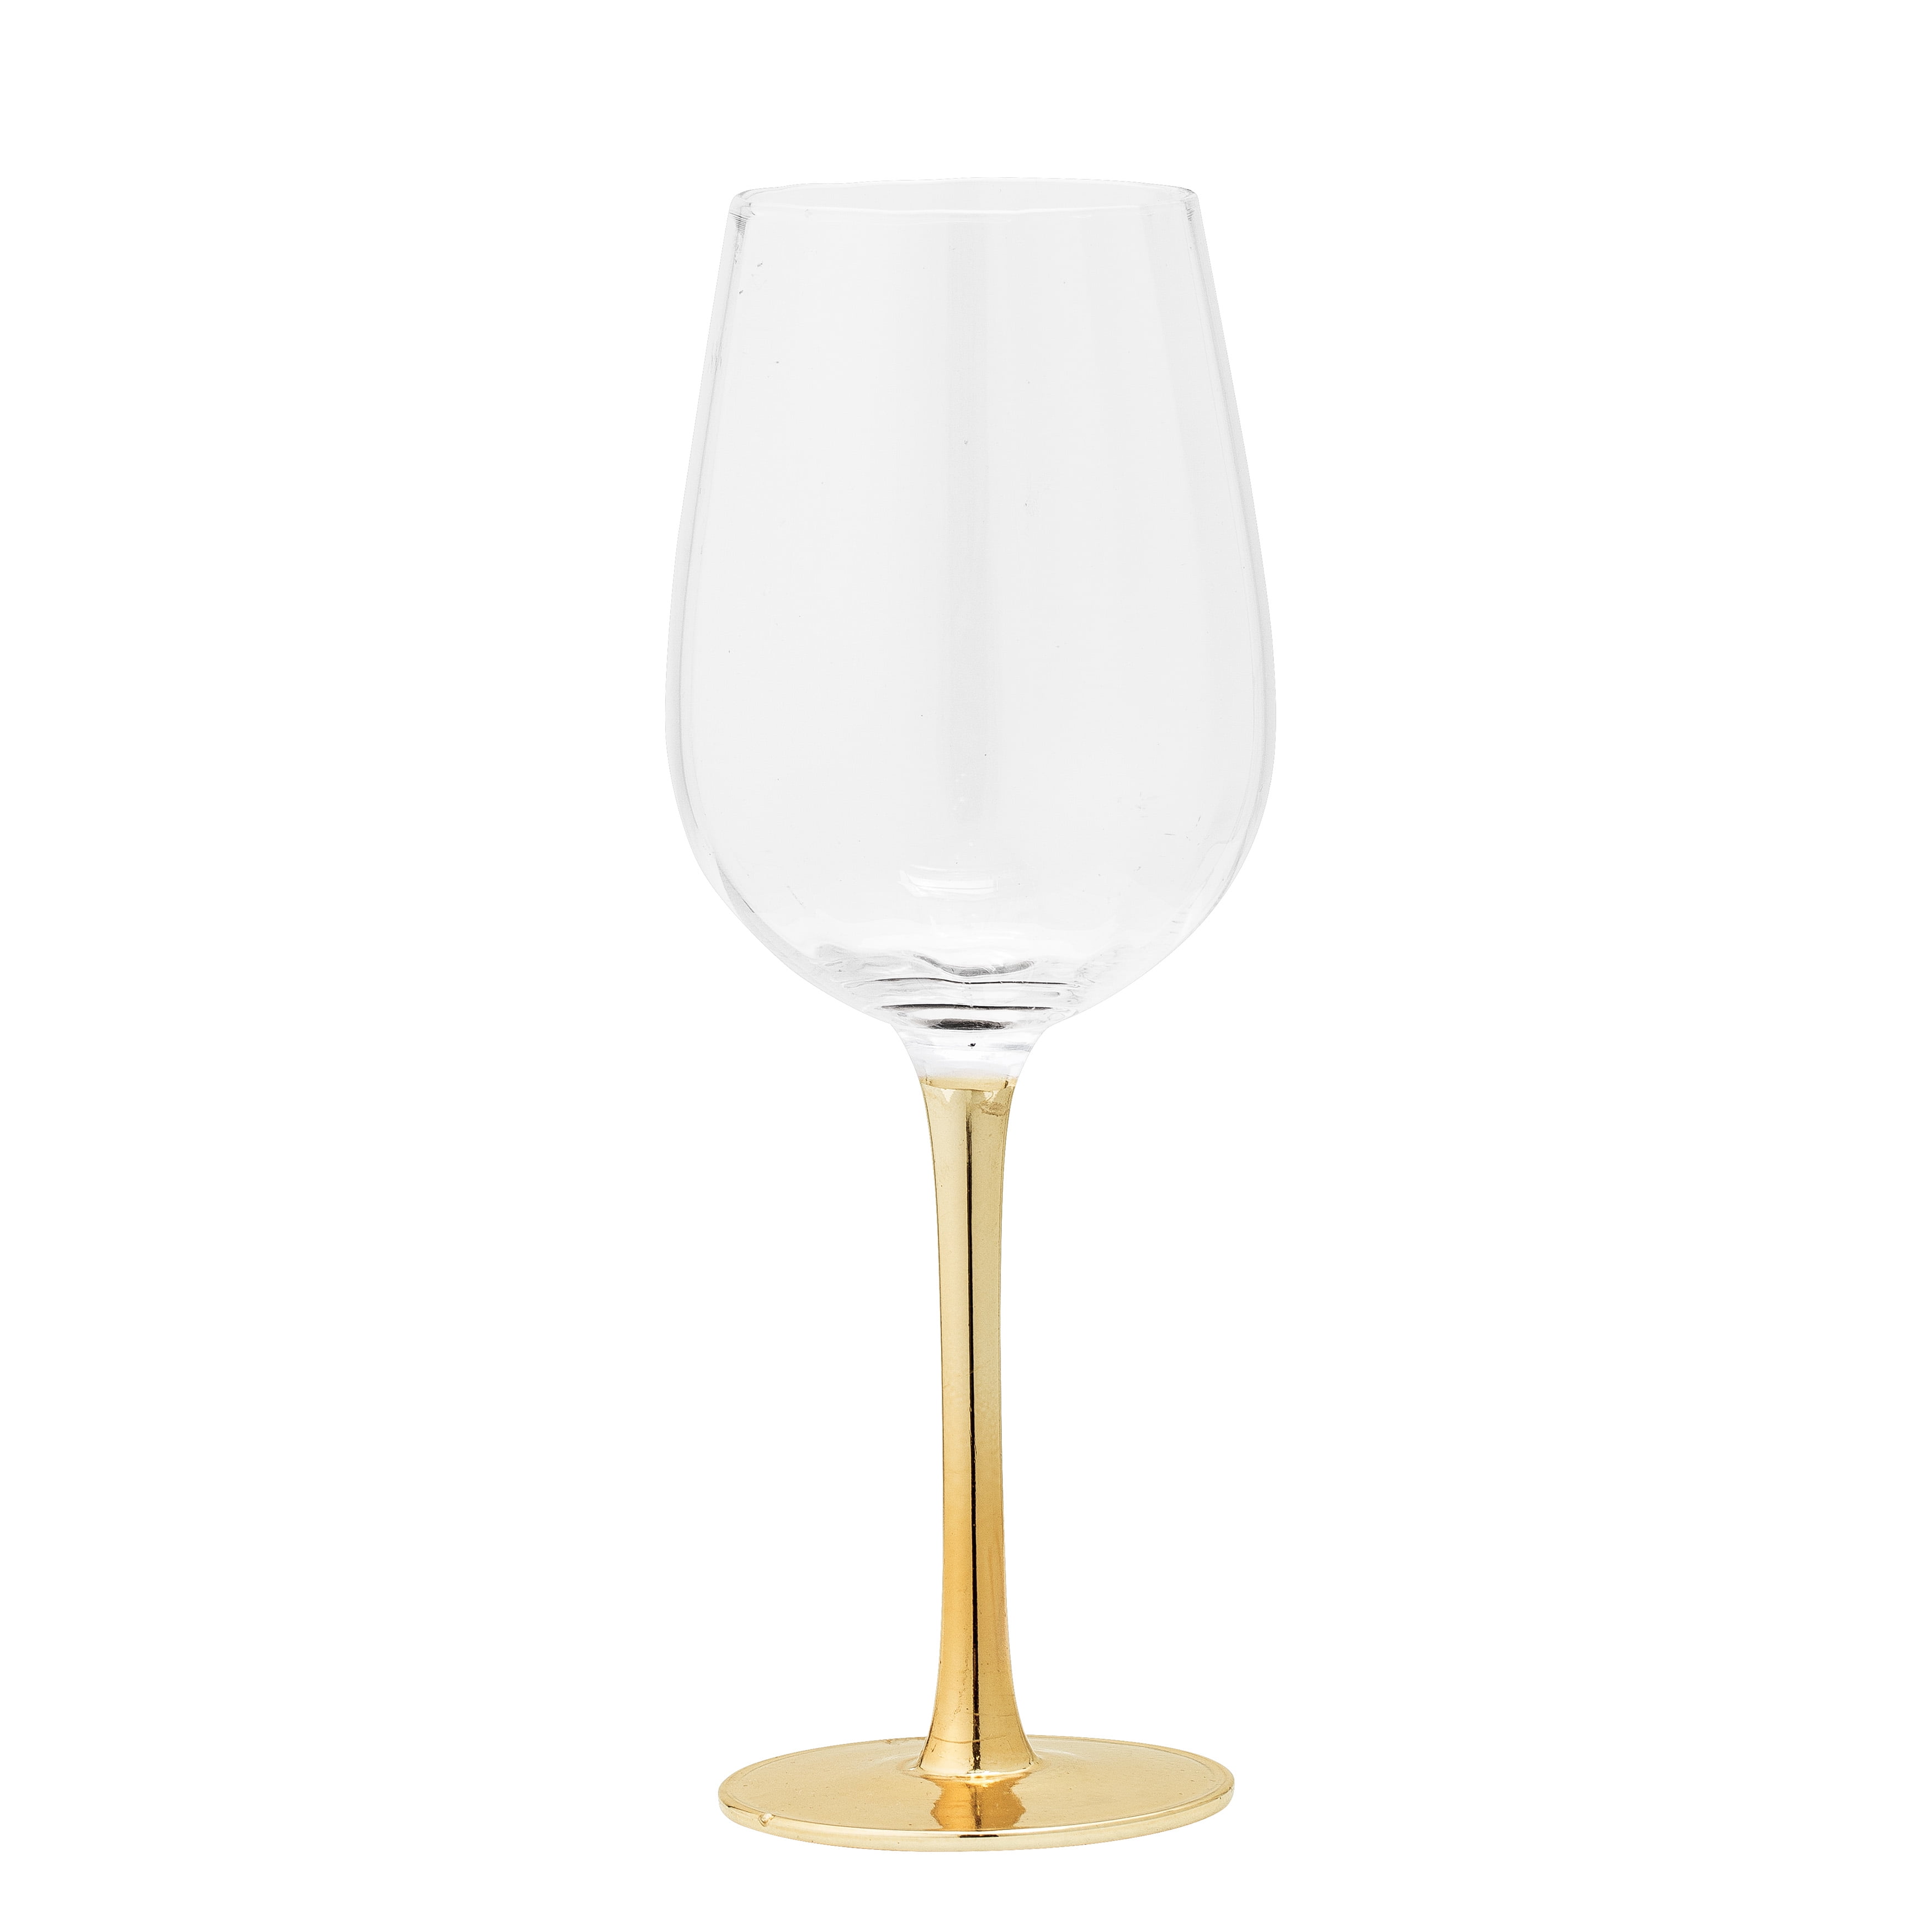 pair of 24ct gold filled stem wine glasses by diamond affair